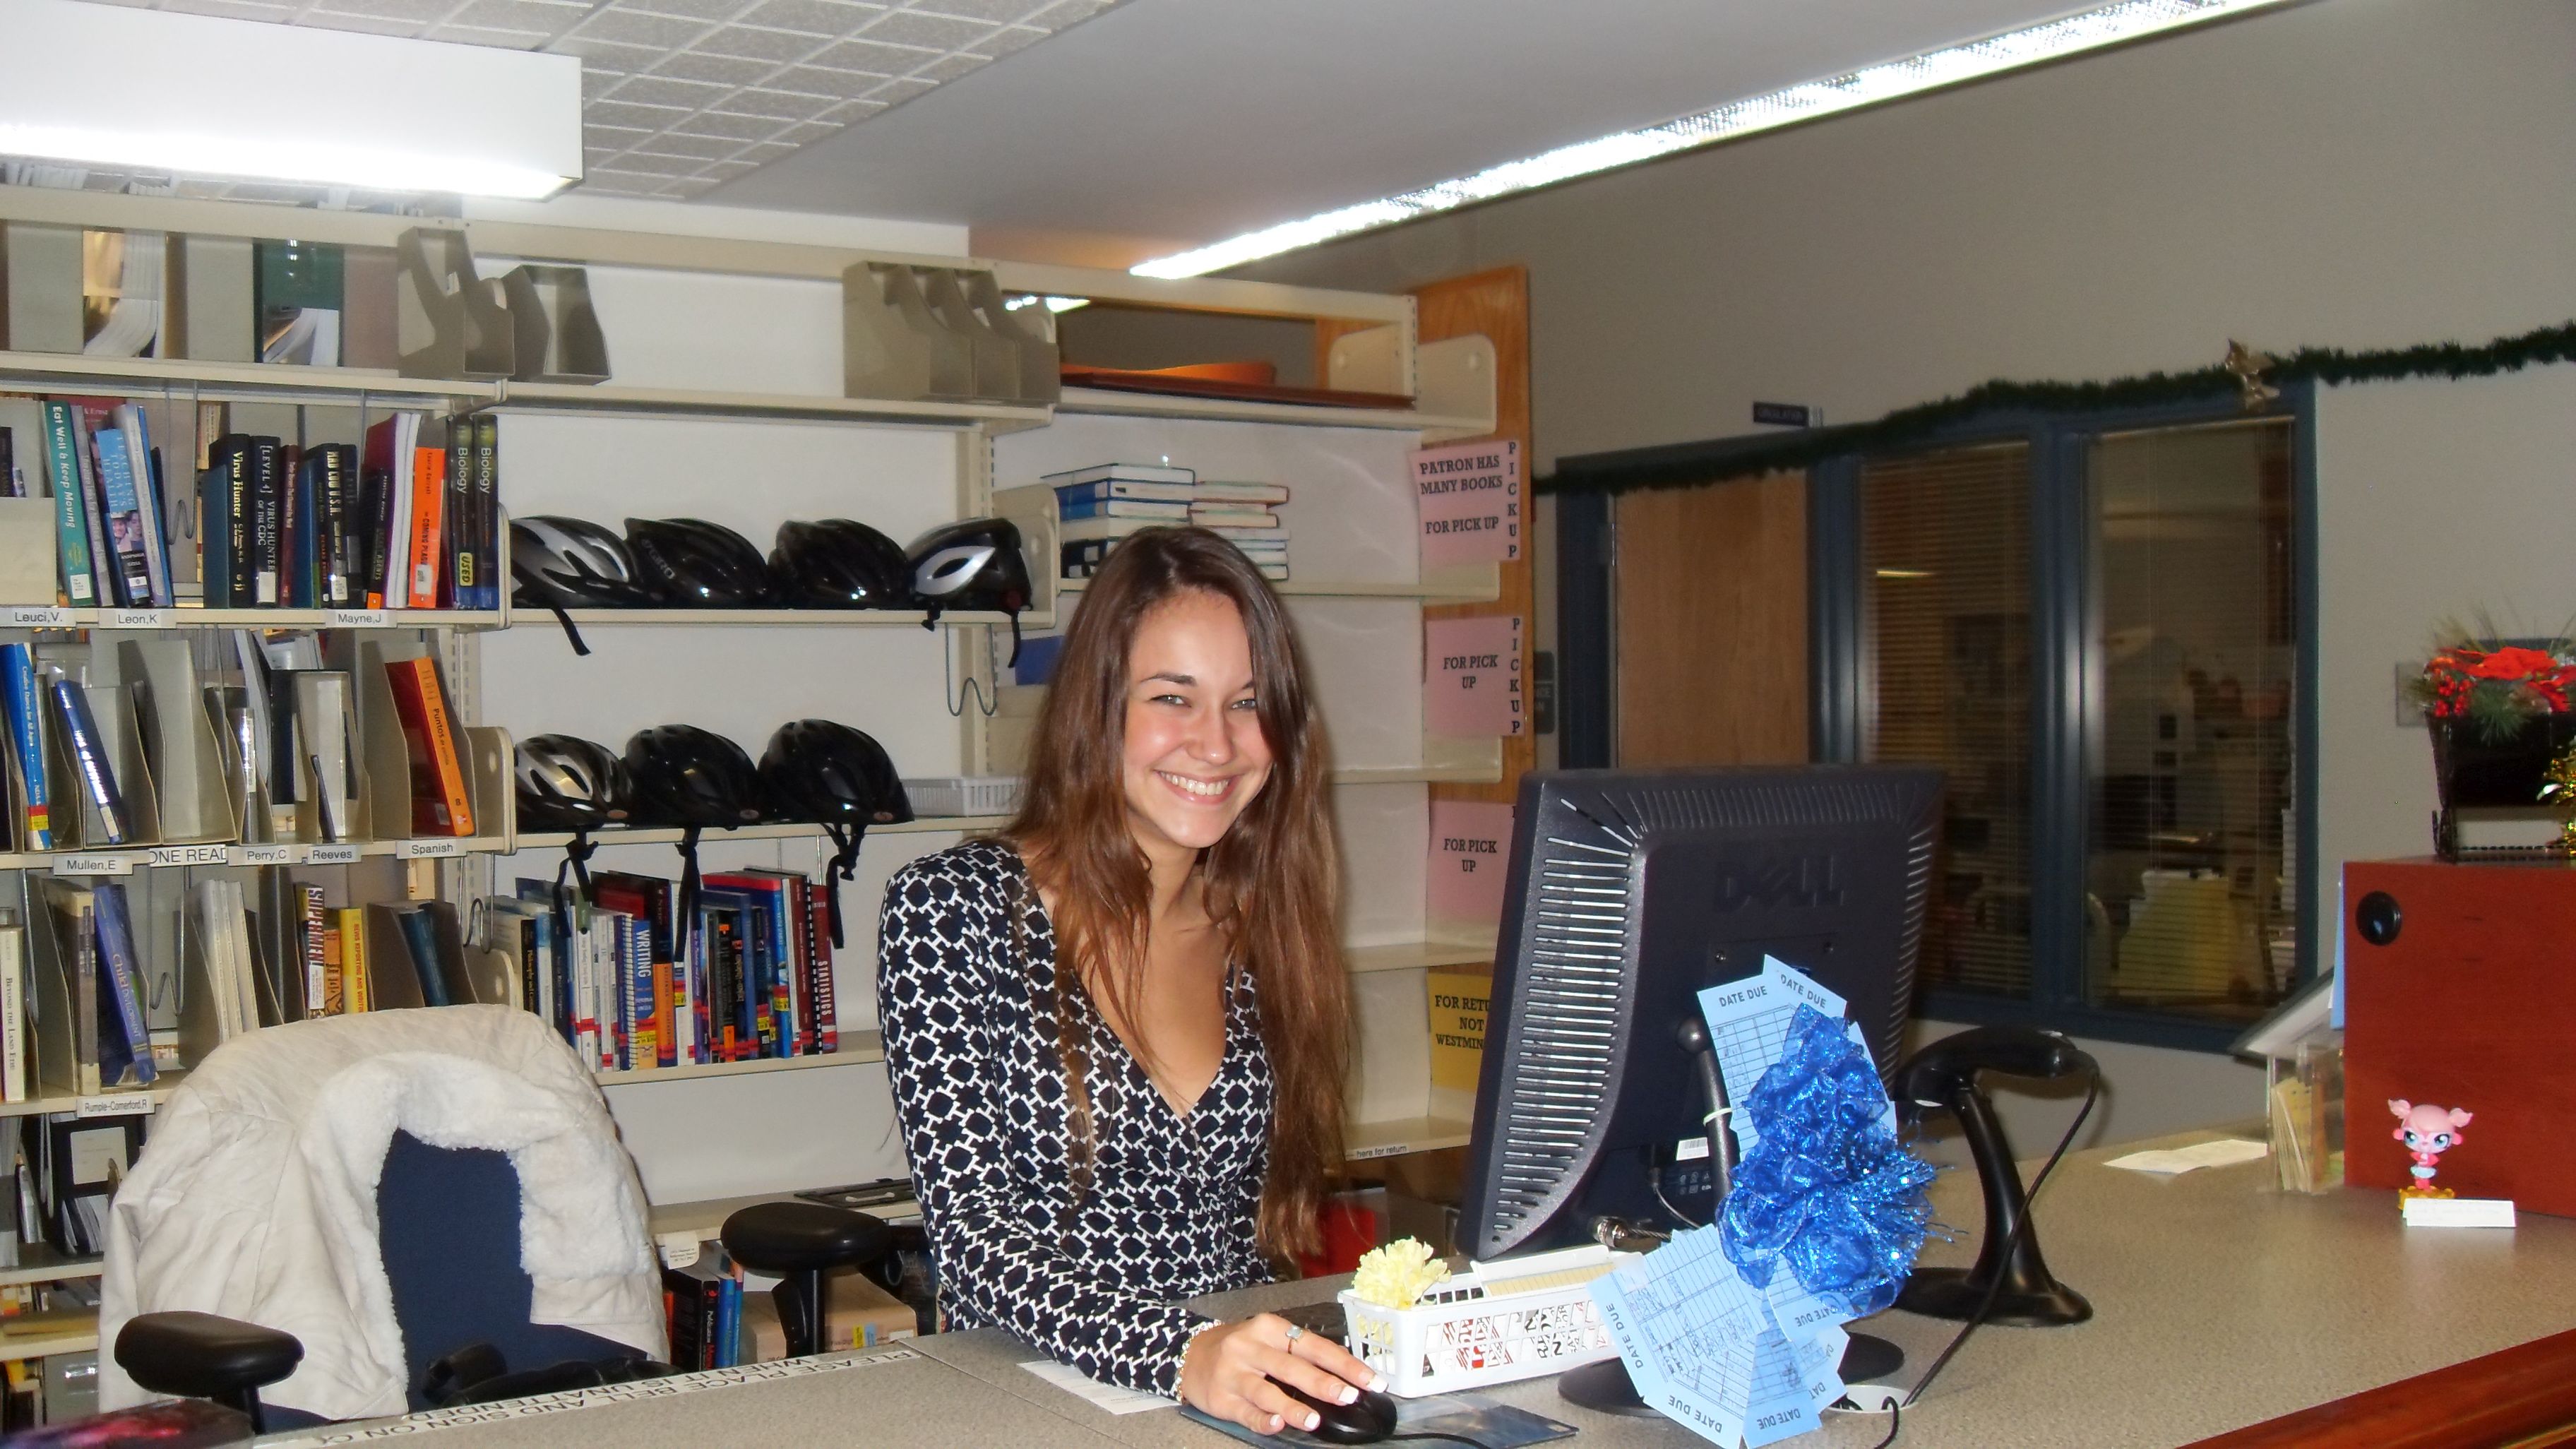 Student working at circulation desk